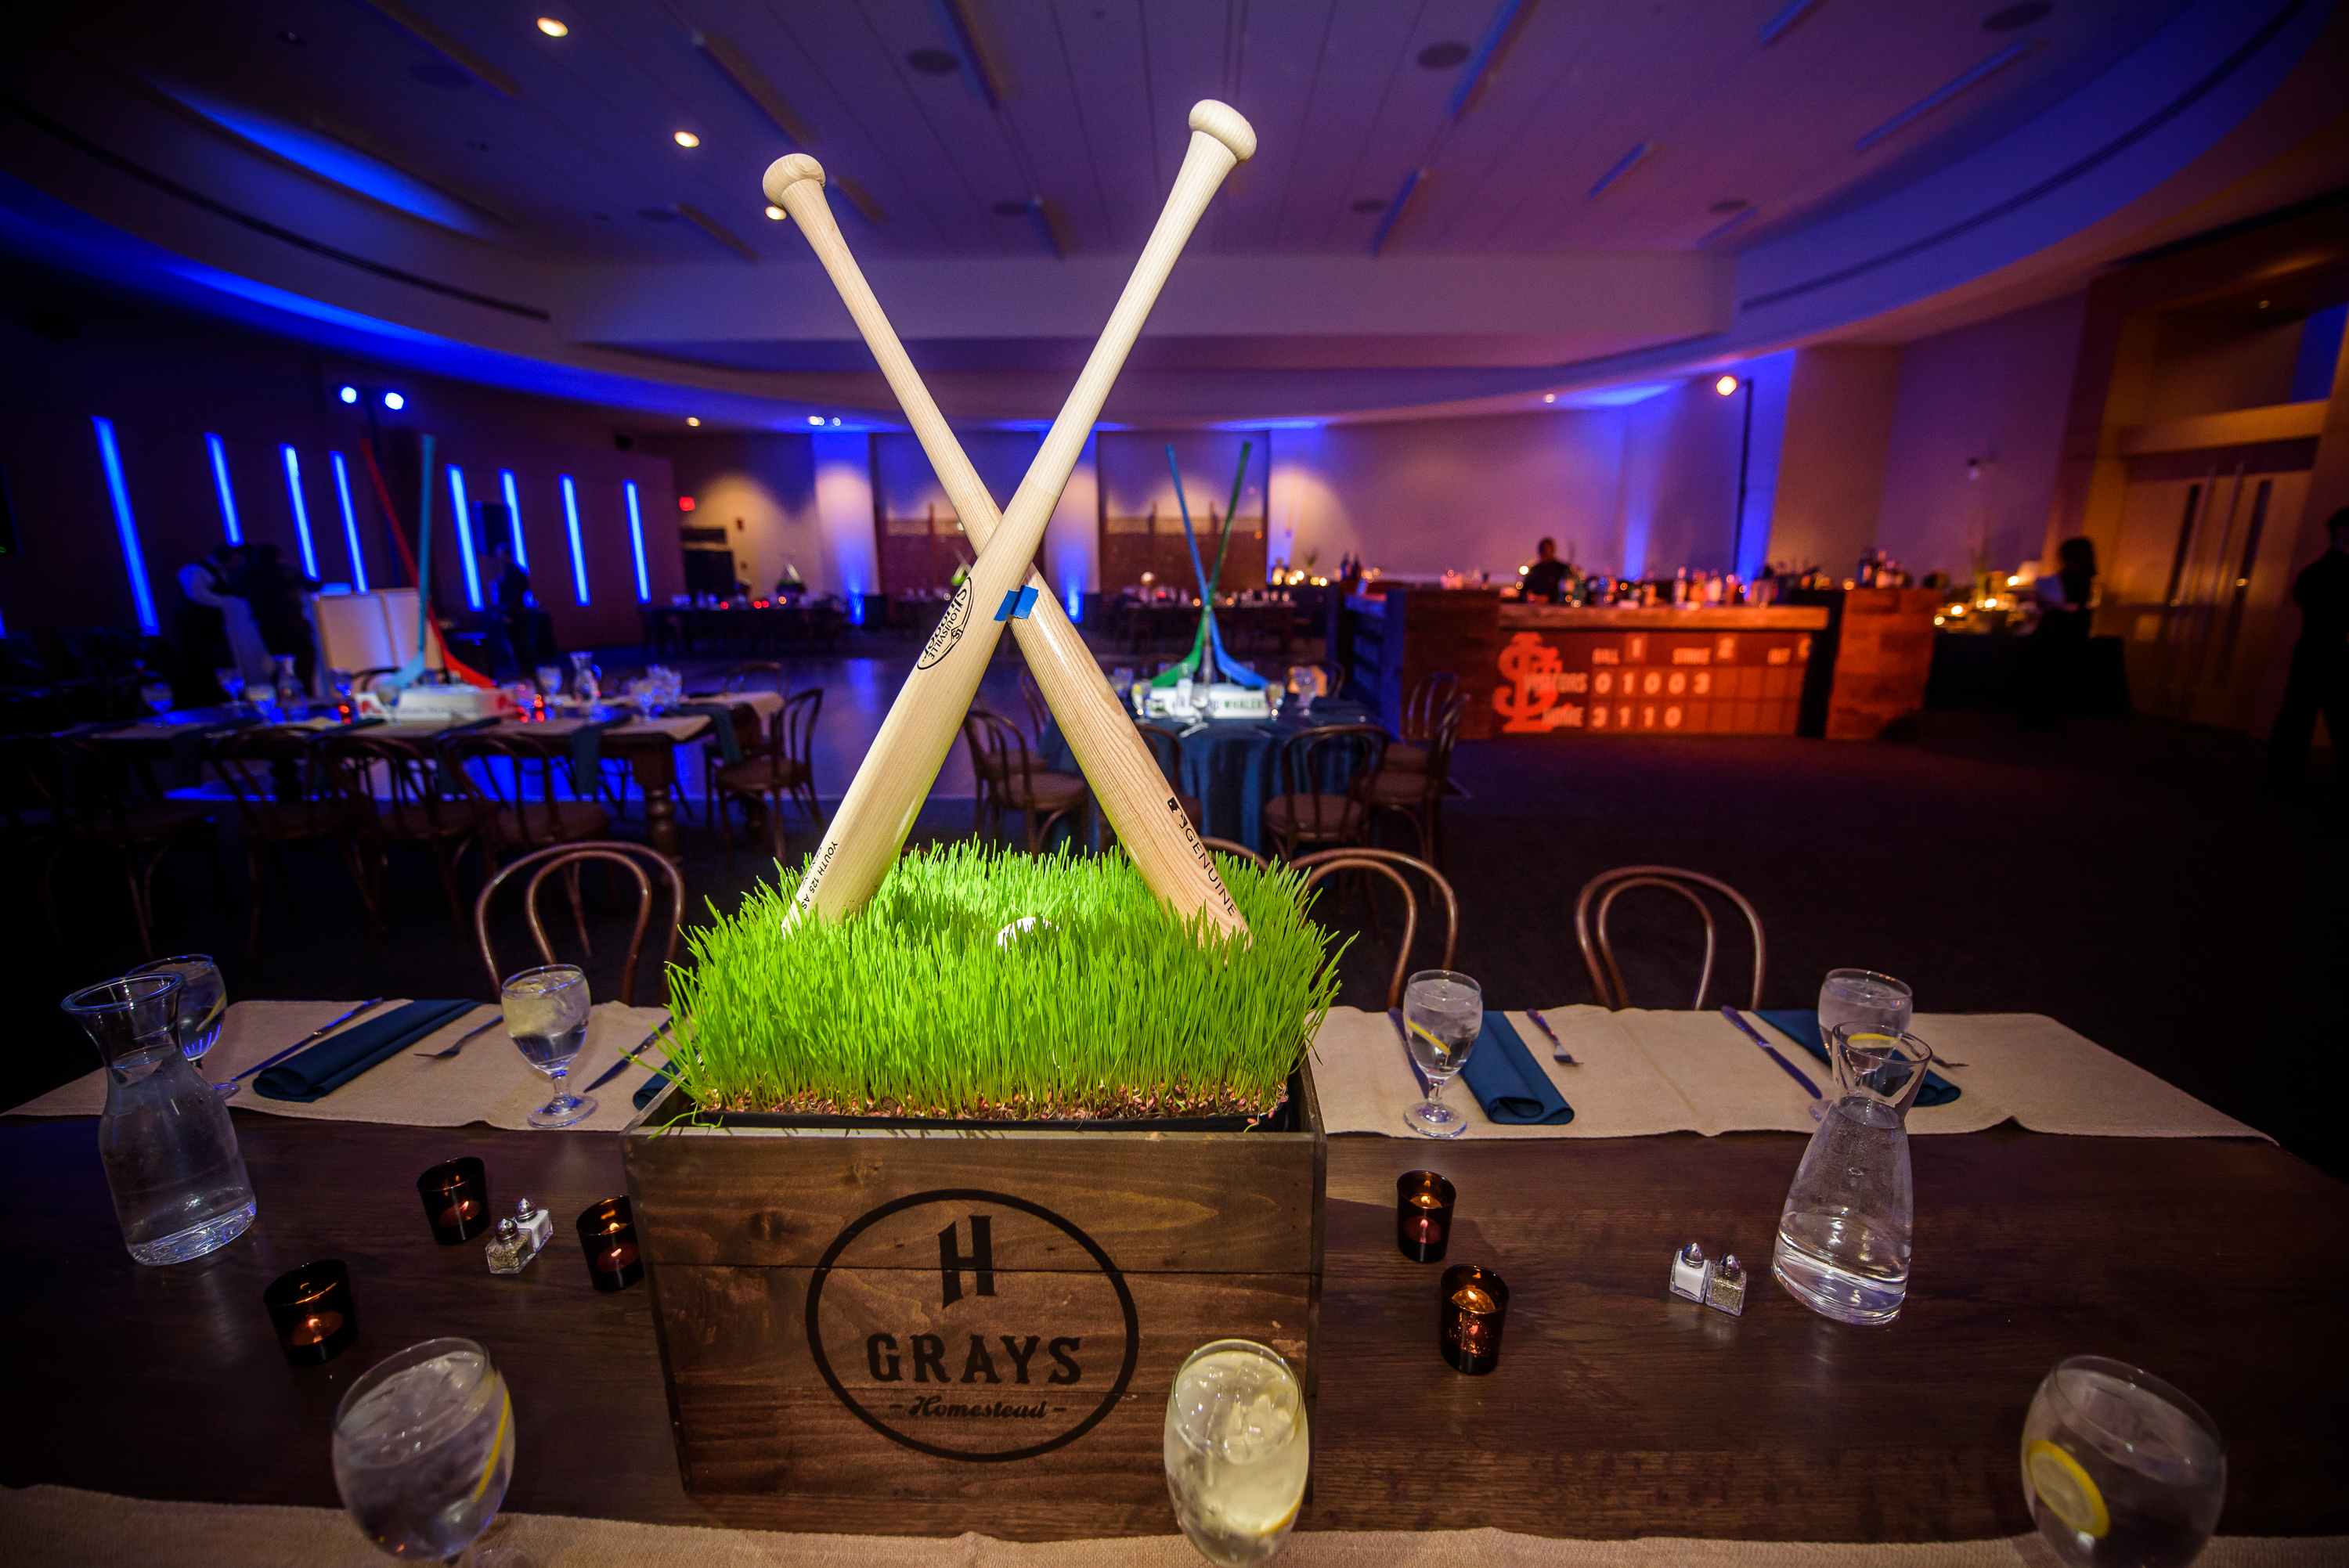 Baseball centerpiece at Vintage sports Bar Mitzvah party at Adas Israel in Washington DC | Pop Color Events | Adding a Pop of Color to Bar & Bat Mitzvahs in DC, MD & VA | Photo by Matt Mendelsohn Creative